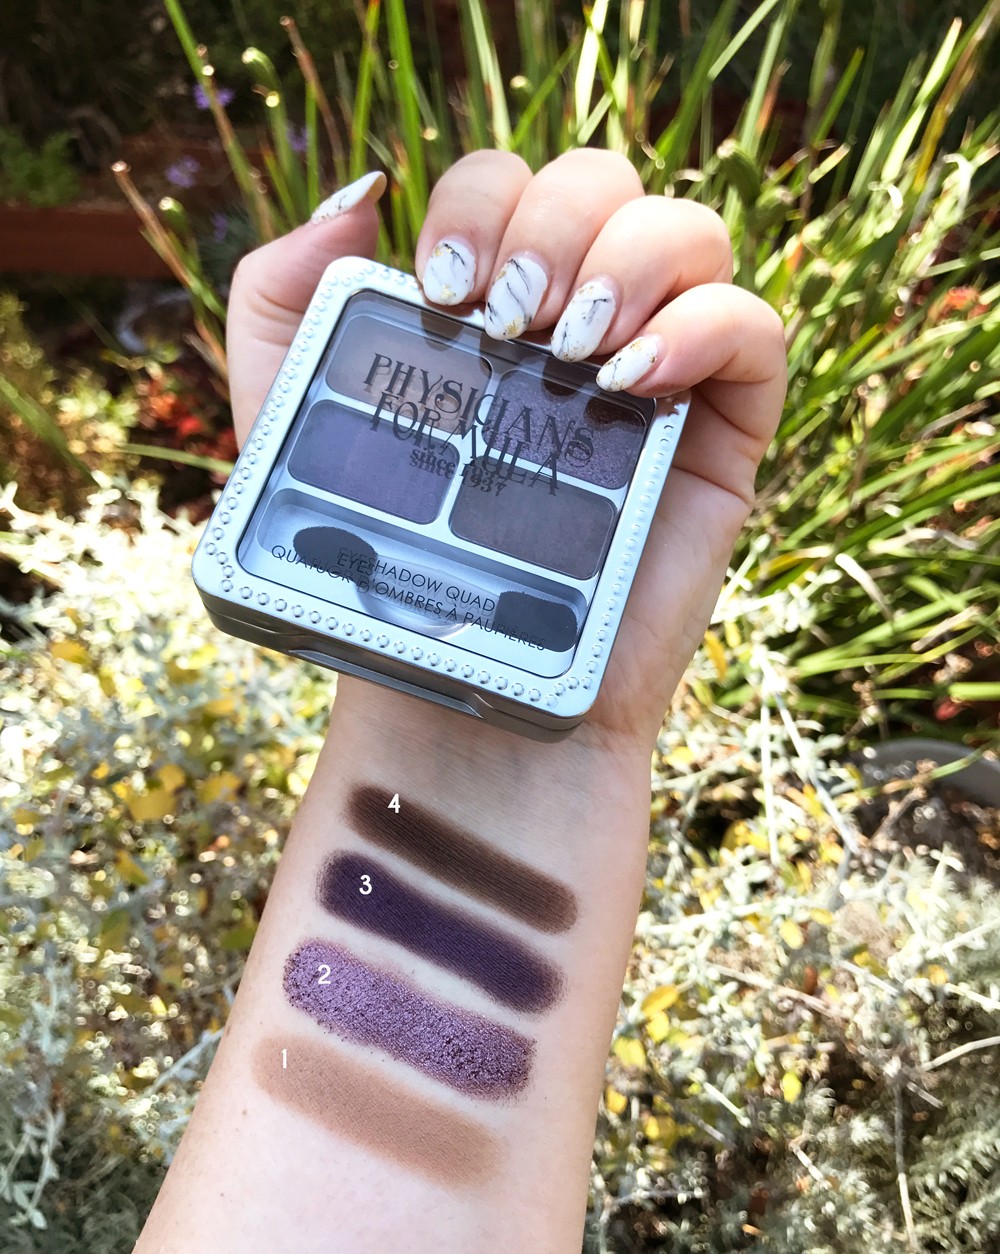 Physicians Formula Smoky Plums Eyeshadow Palette Swatches